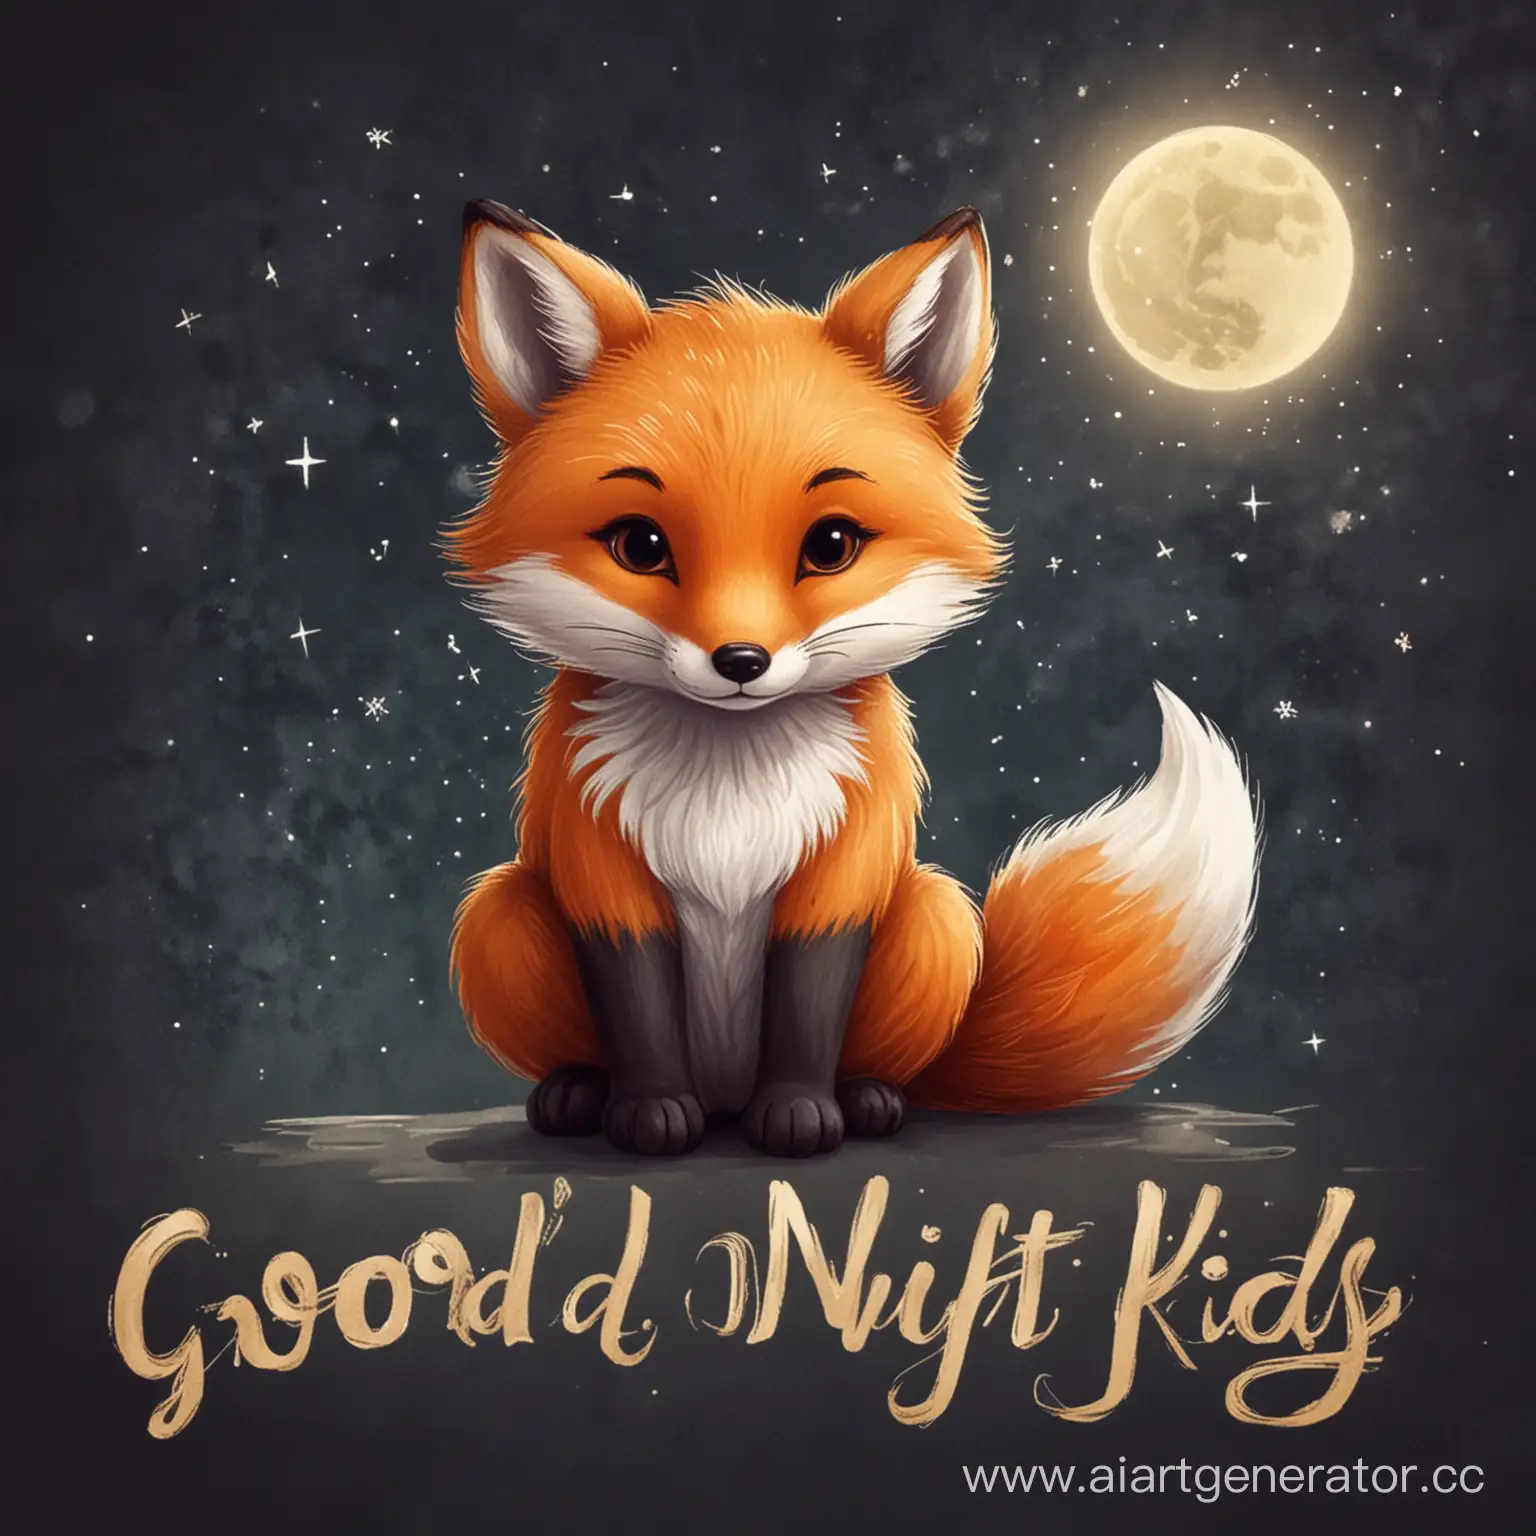 Cute-Fox-Wishing-Kids-a-Good-Night-with-Adorable-Inscription